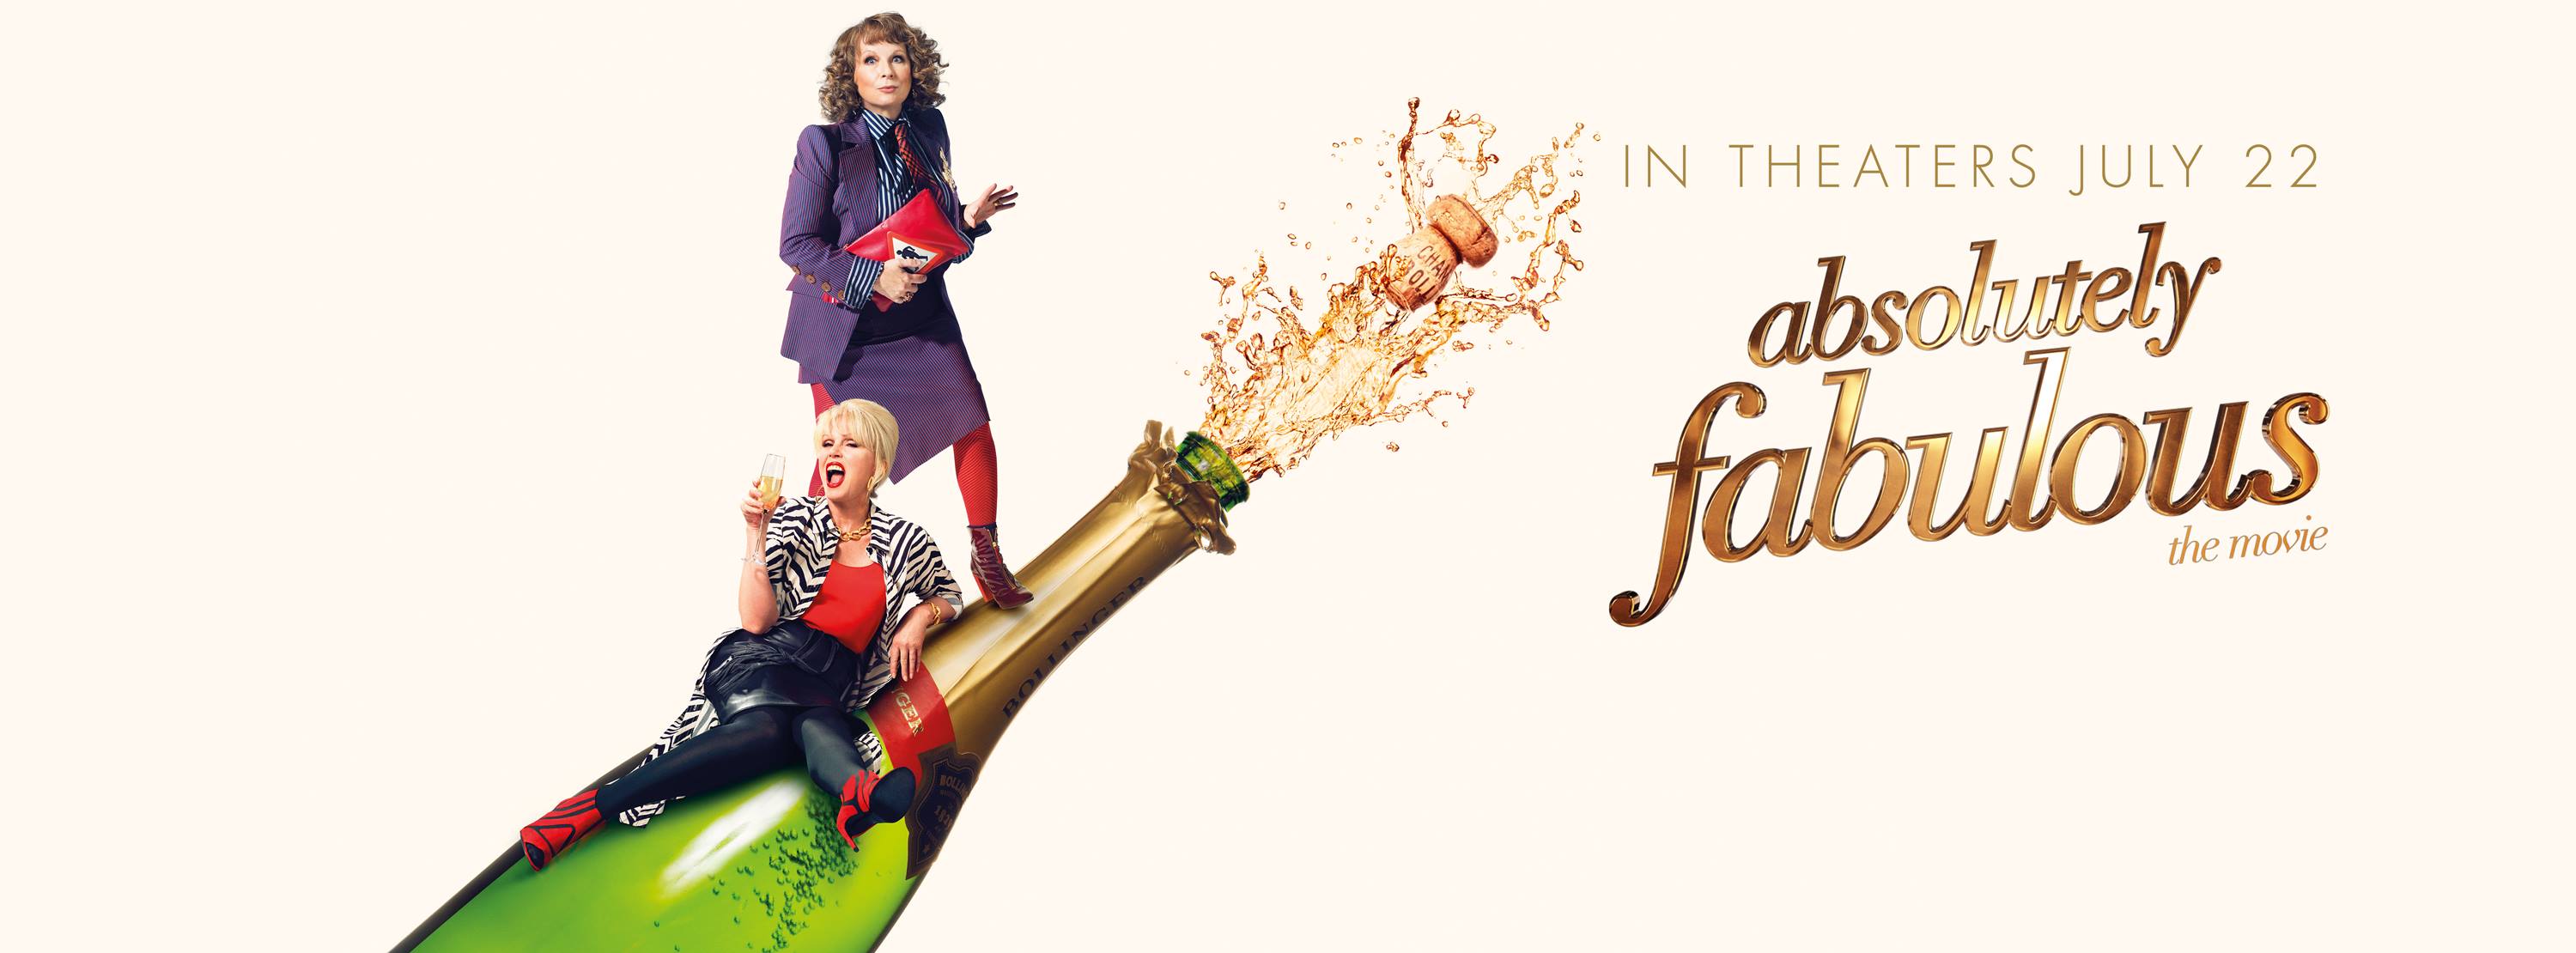 Enter Macy's #AbFabStyle Contest and You Could Win a Red Carpet Experience and Tickets to the Premiere 3